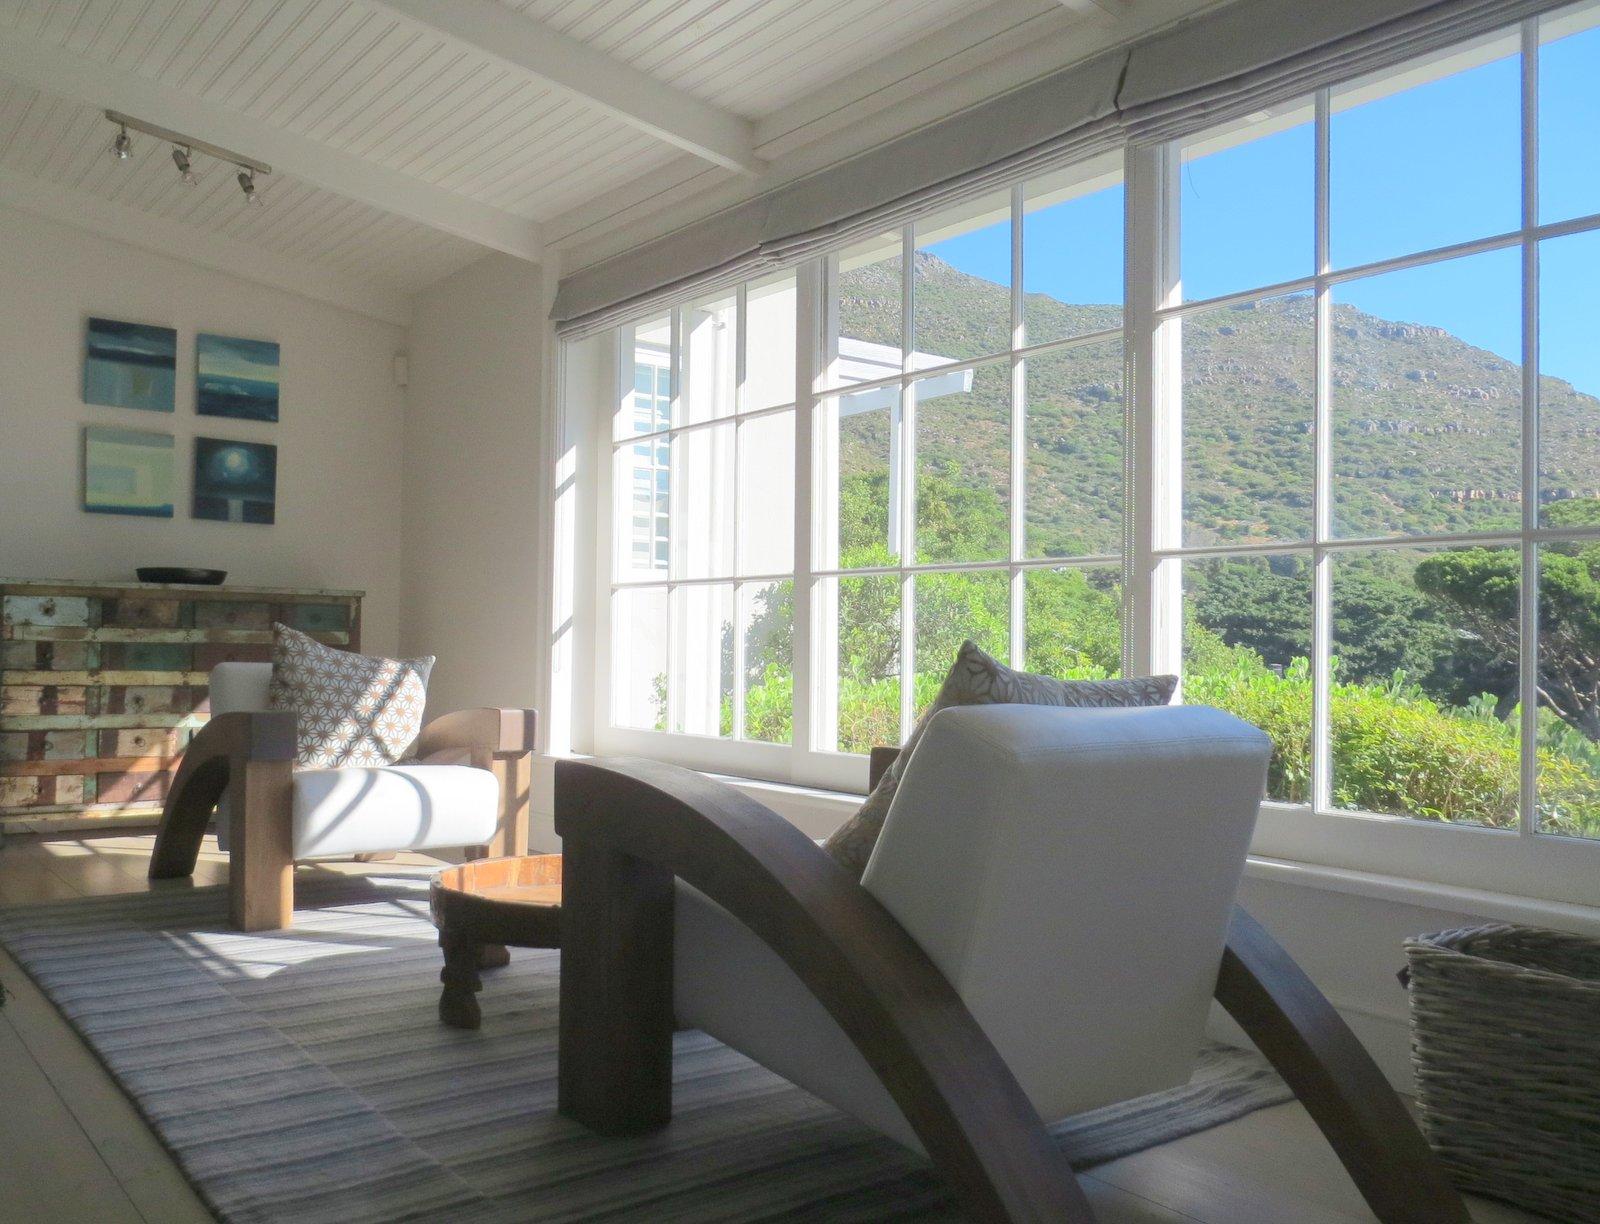 Photo 10 of Riverstone Villa accommodation in Hout Bay, Cape Town with 4 bedrooms and 3 bathrooms